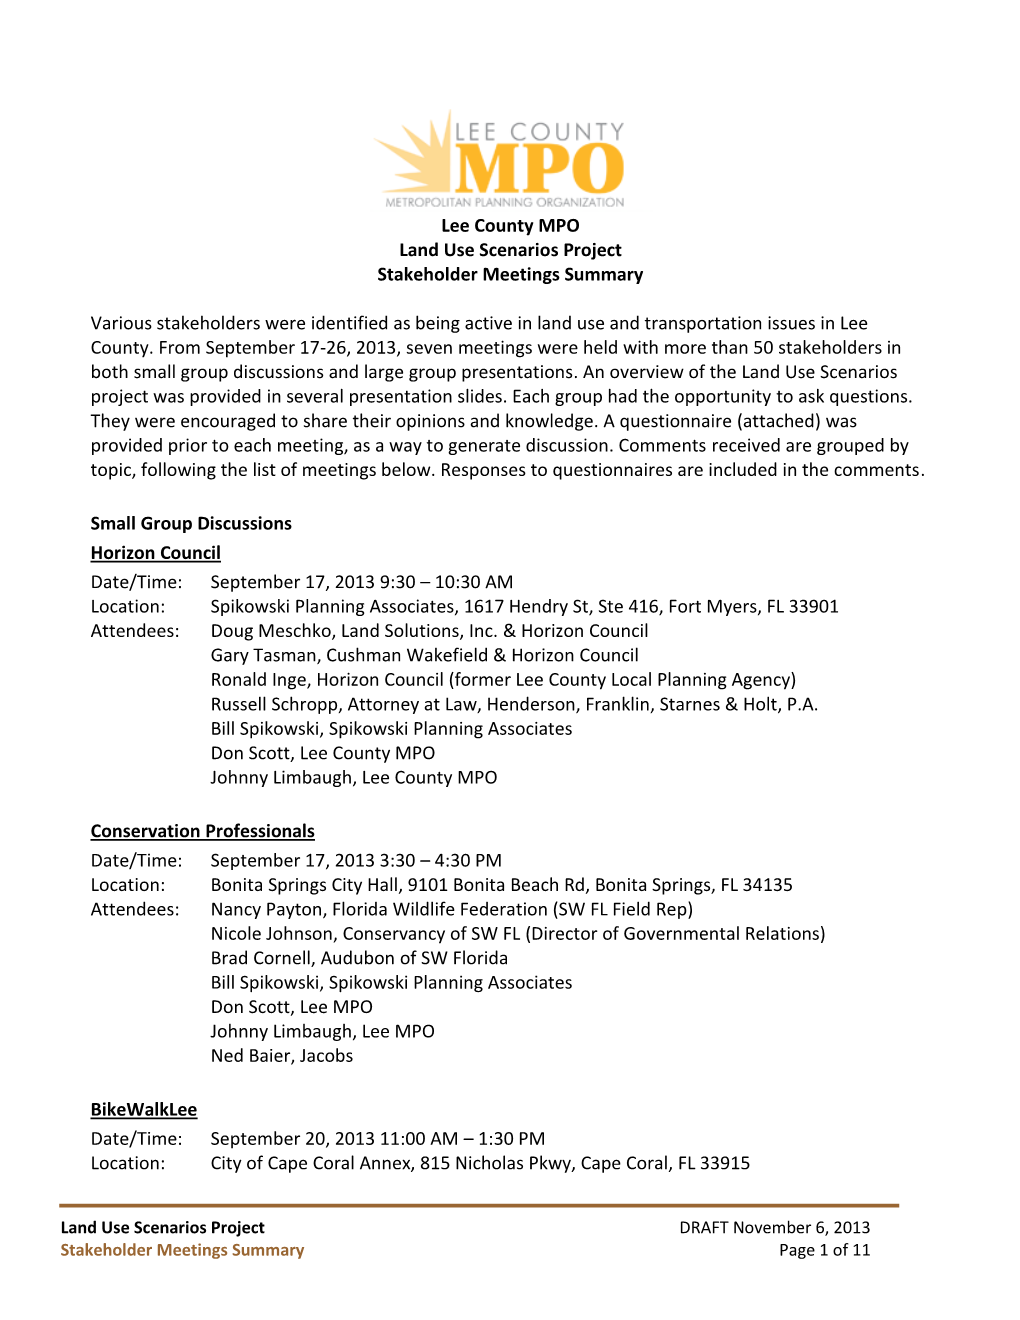 Lee County MPO Land Use Scenarios Project Stakeholder Meetings Summary